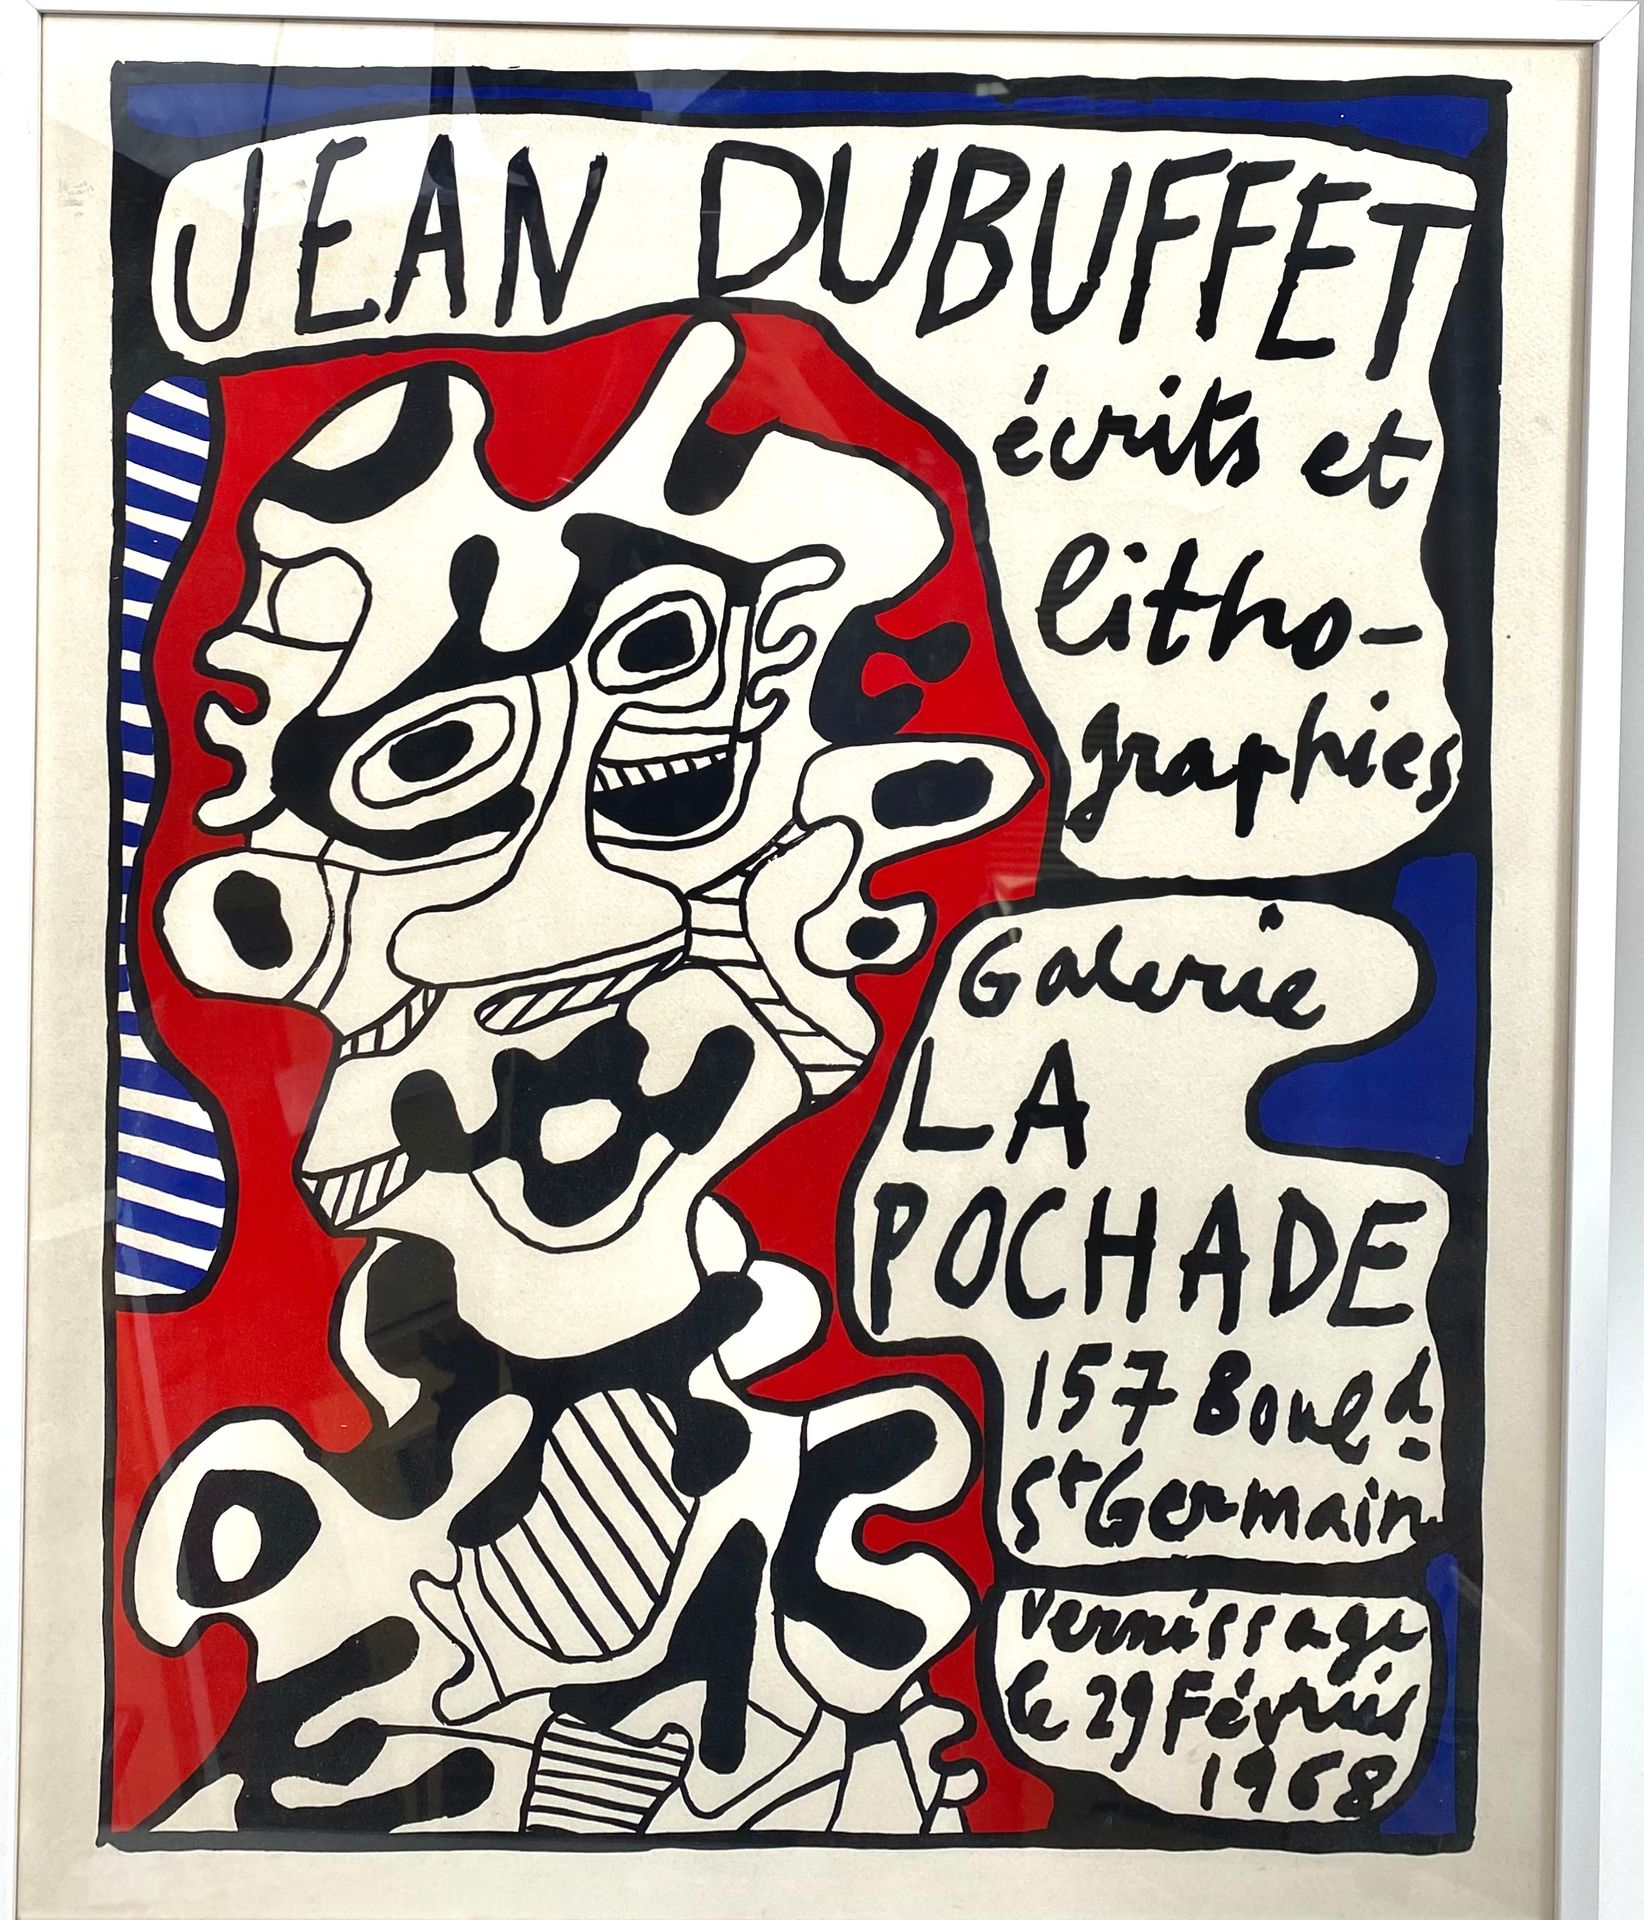 Null Jean DUBUFFET (1901-1985)

Ecrits et Lithographies, Galerie La Pochade, Avr&hellip;